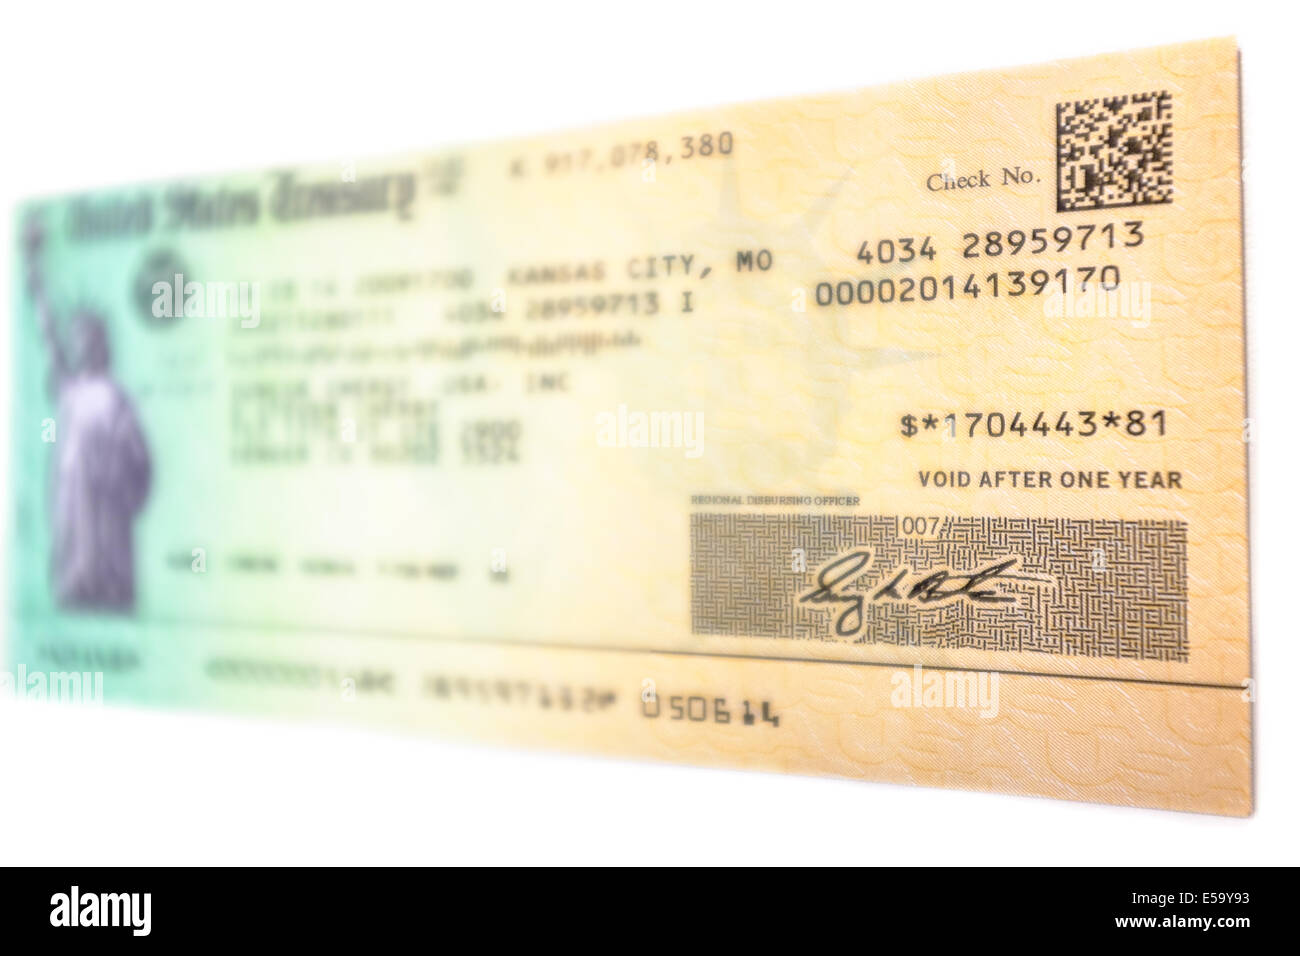 A tax refund check in the amount of $1,704,443.81 issued by the Stock Photo: 72133743 ...1300 x 956